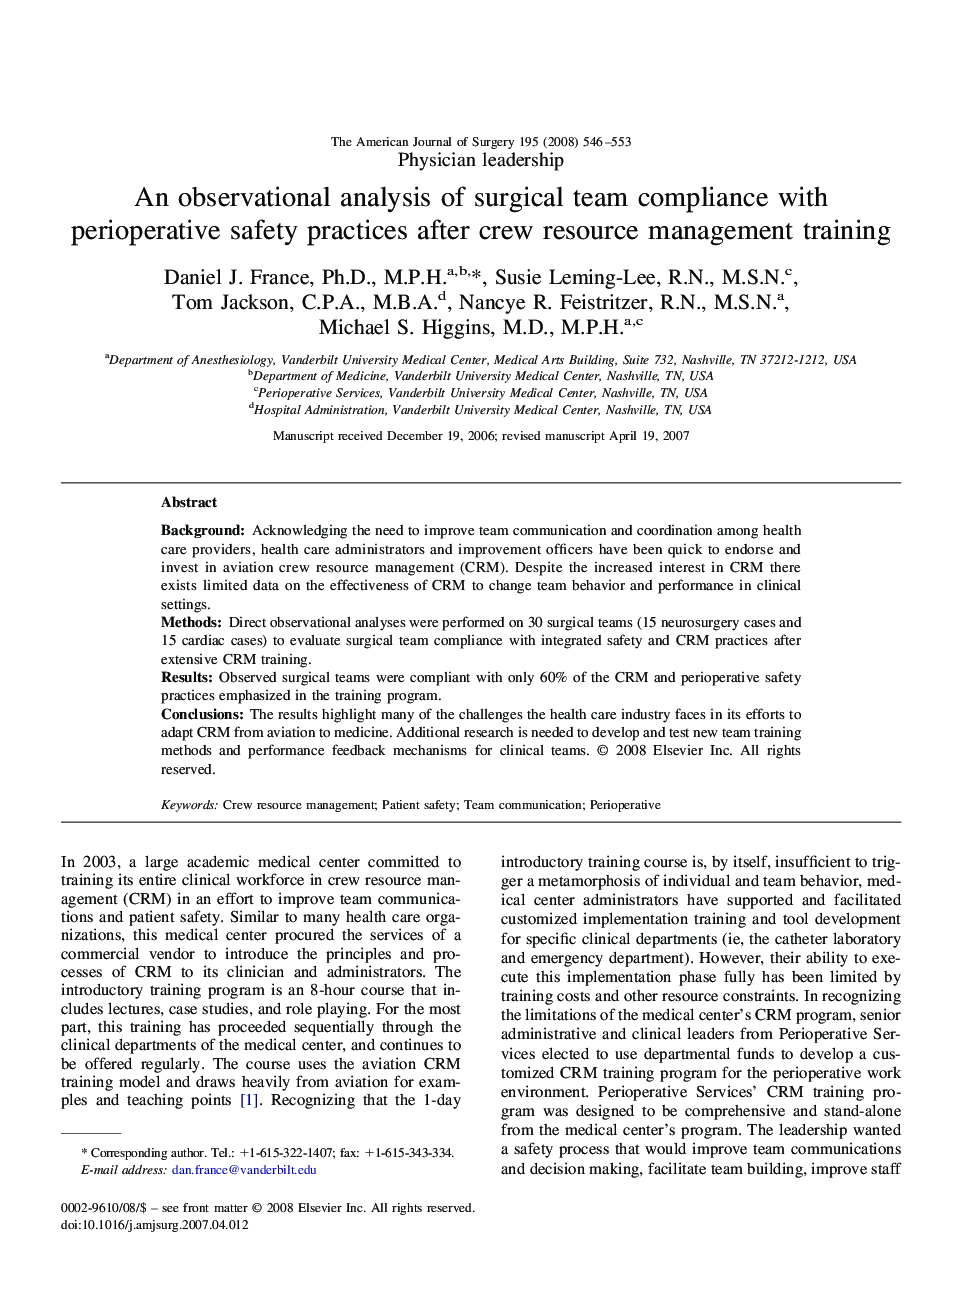 An observational analysis of surgical team compliance with perioperative safety practices after crew resource management training